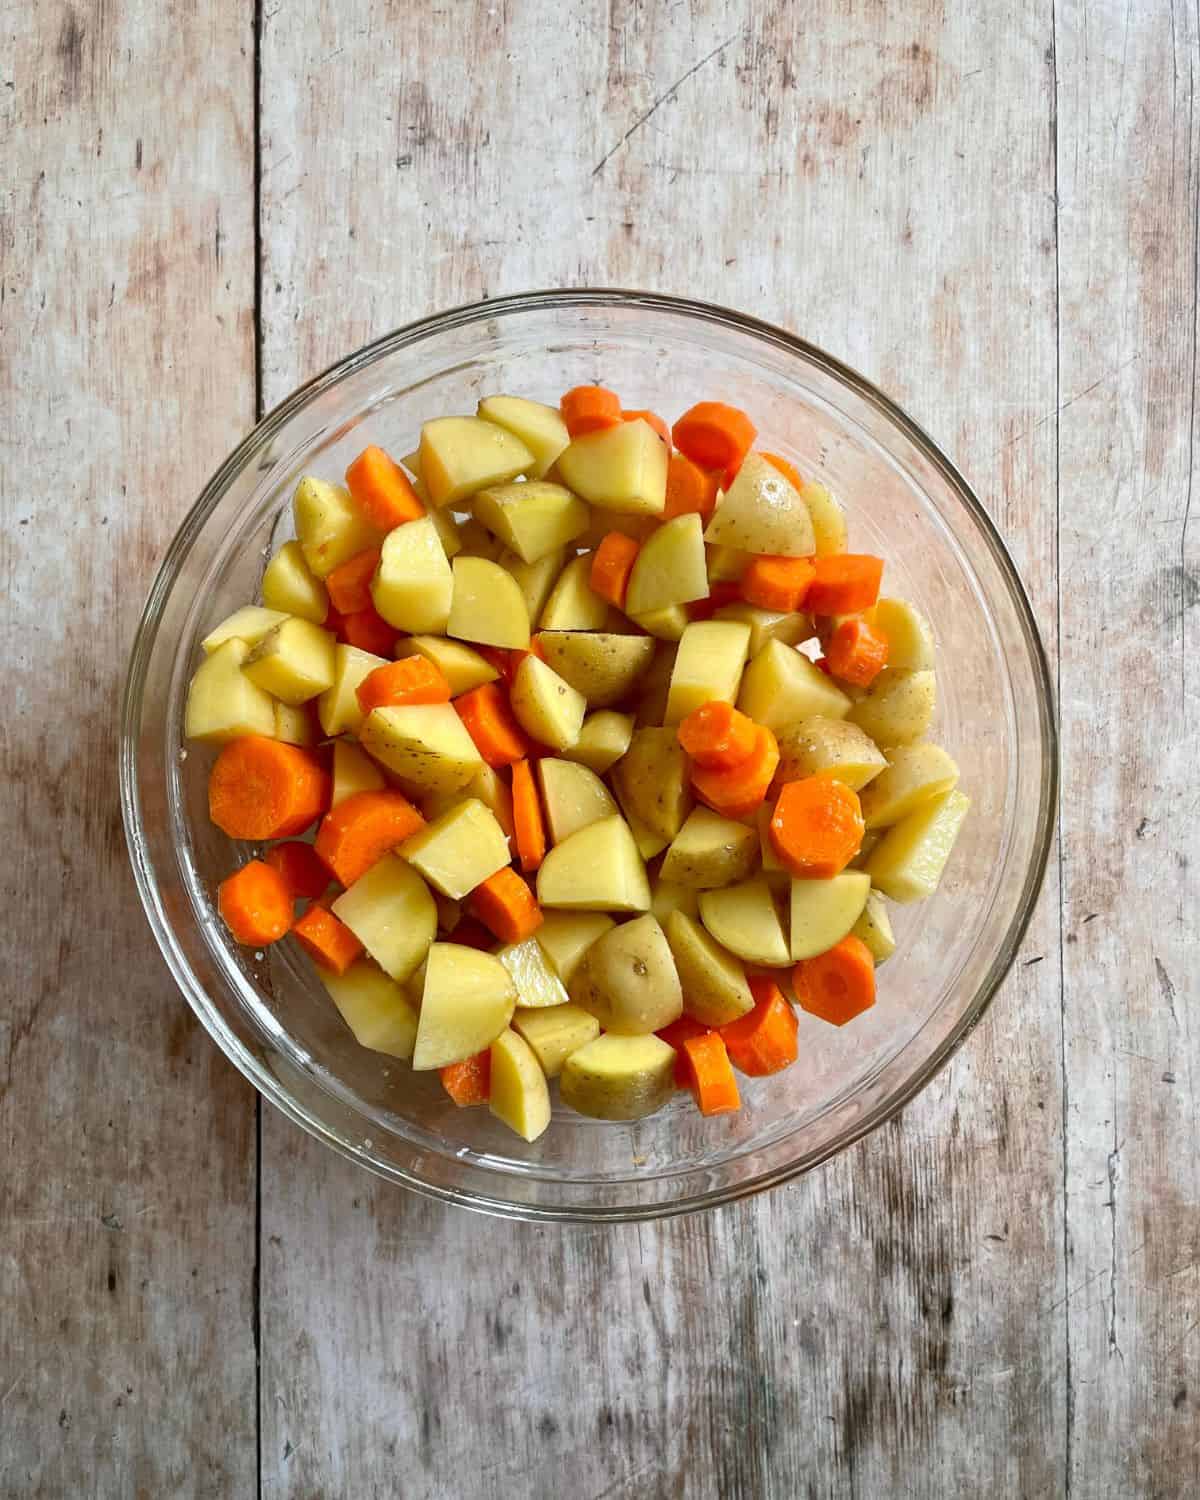 Chopped potatoes and carrots in a glass bowl.